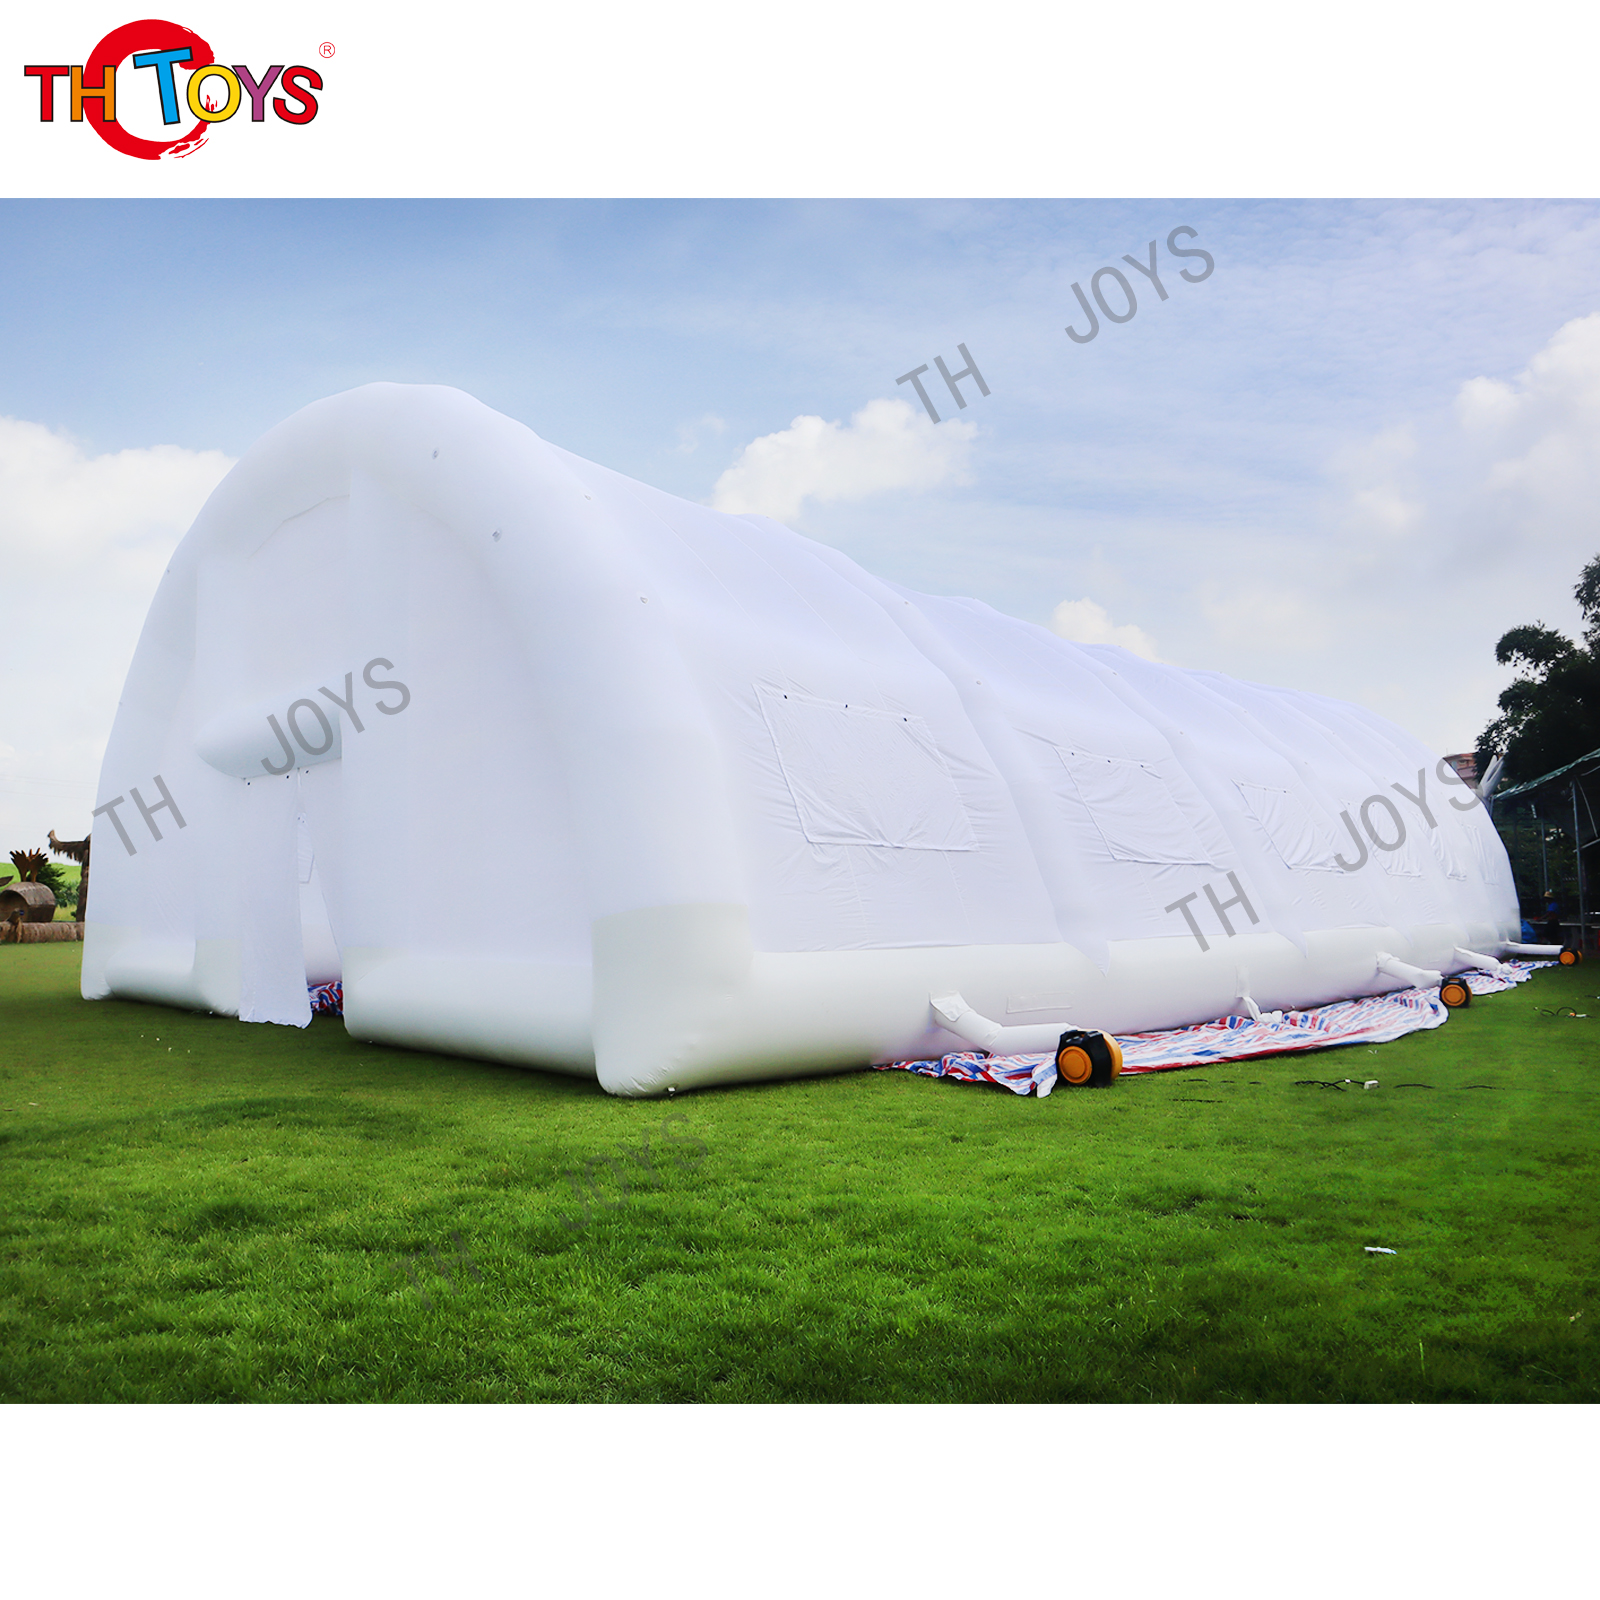 Inflatable spider tents07